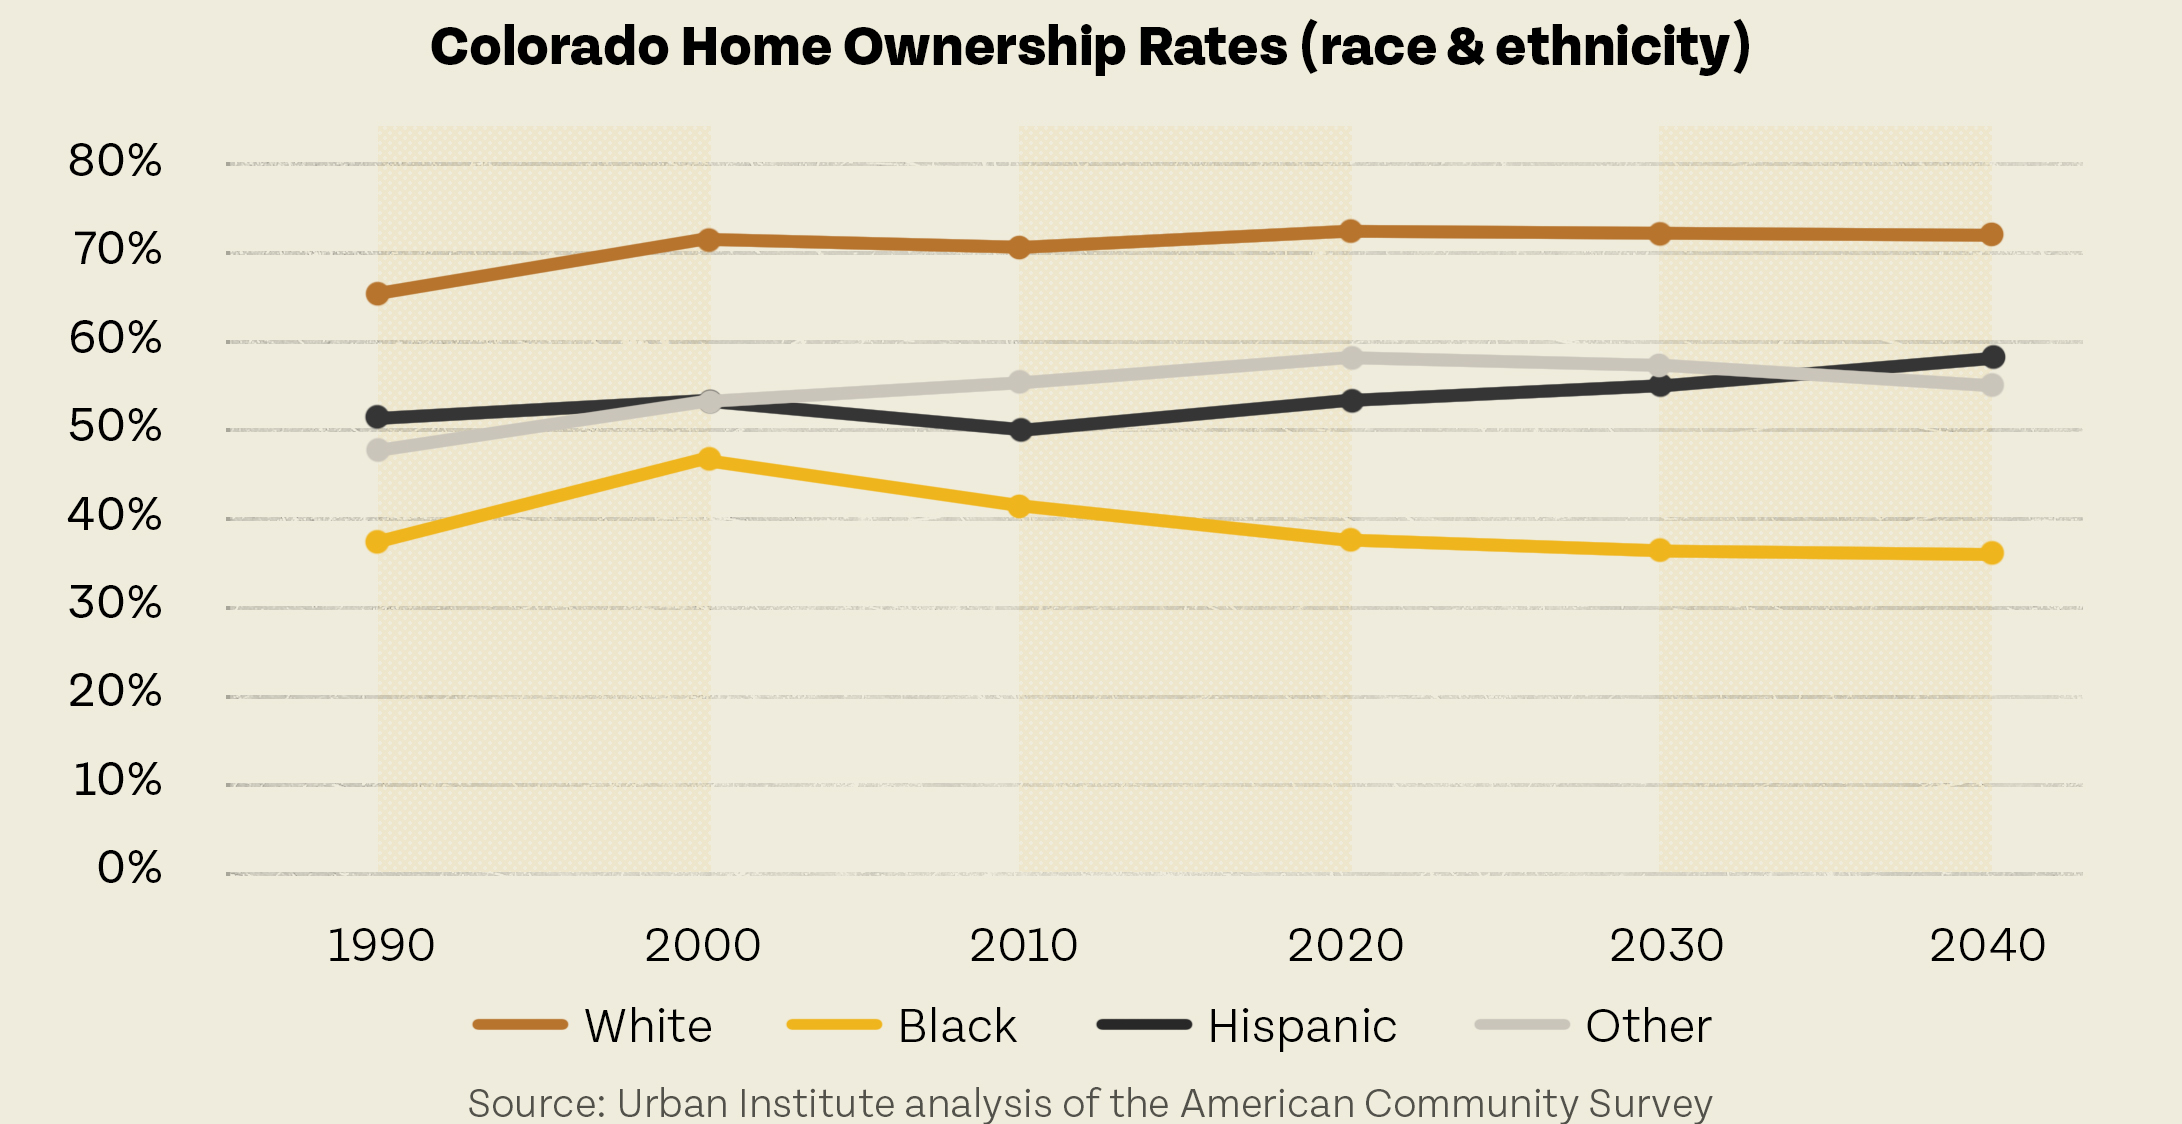 Graph showing Colorado housing market ownership rates by race & ethnicity from 1990 to 2040, with projections, based on data from the Urban Institute analysis of the American Community Survey.